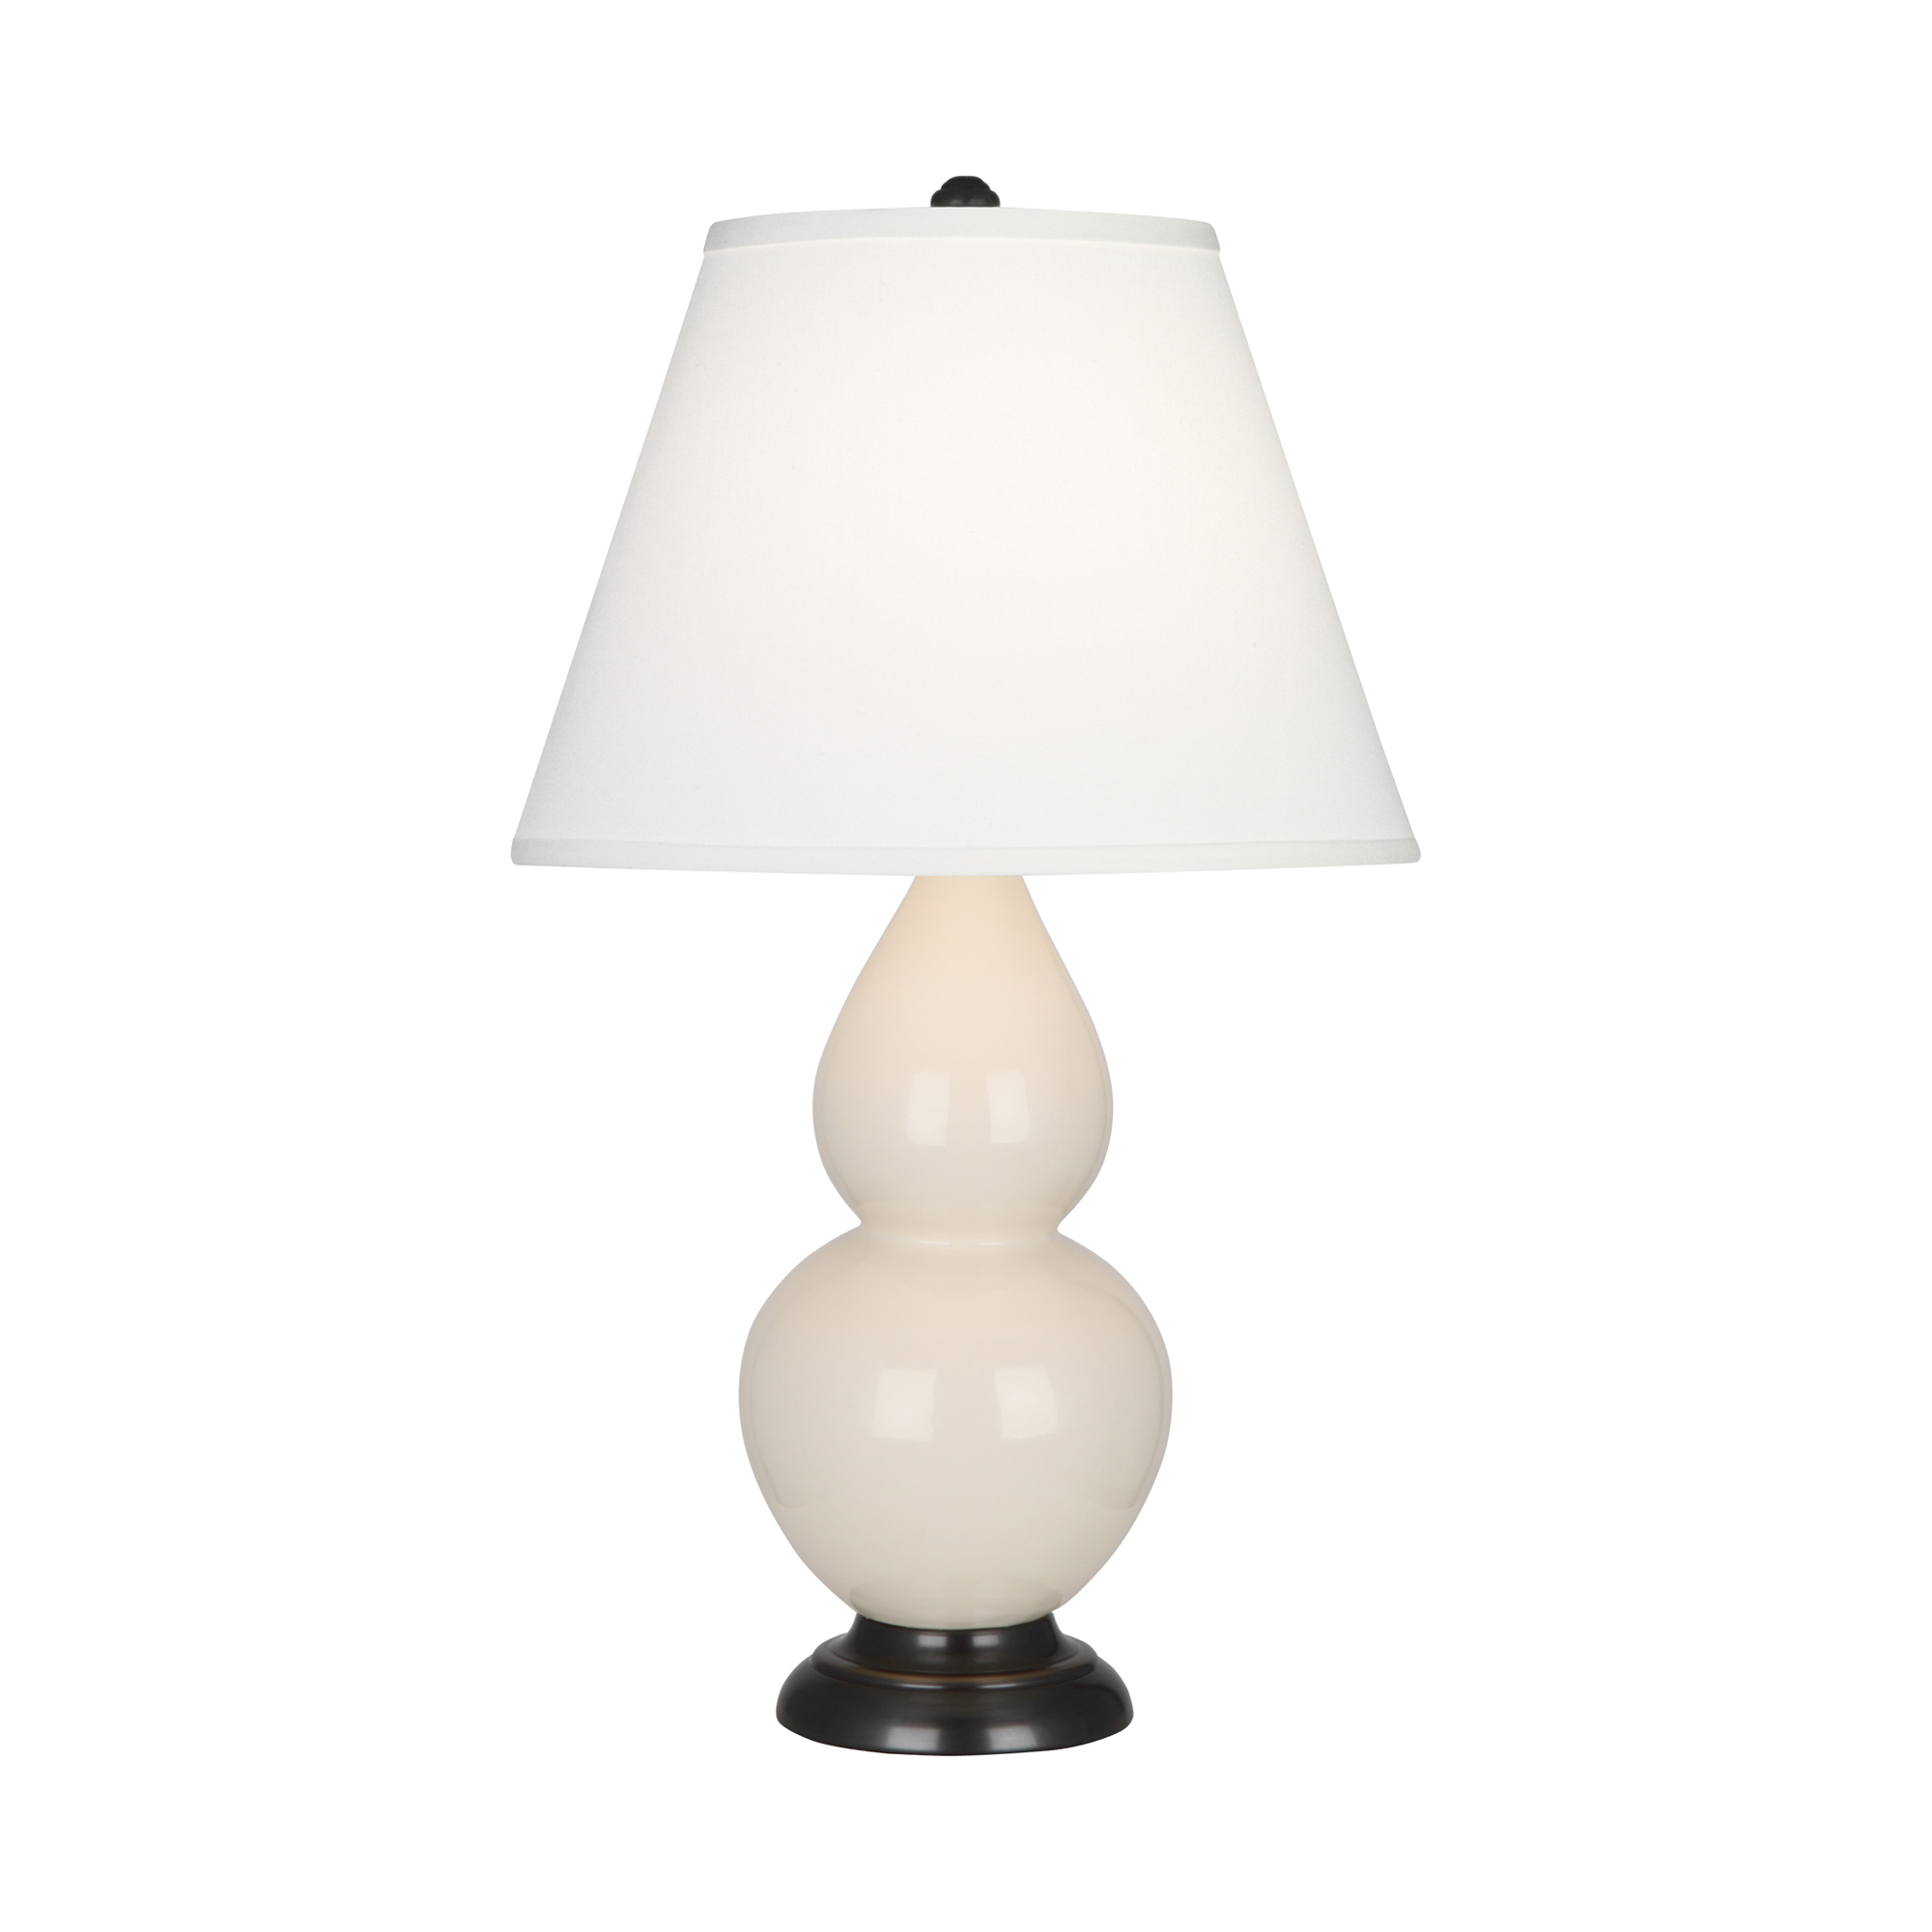 Small Double Gourd Accent Lamp Style #1775X